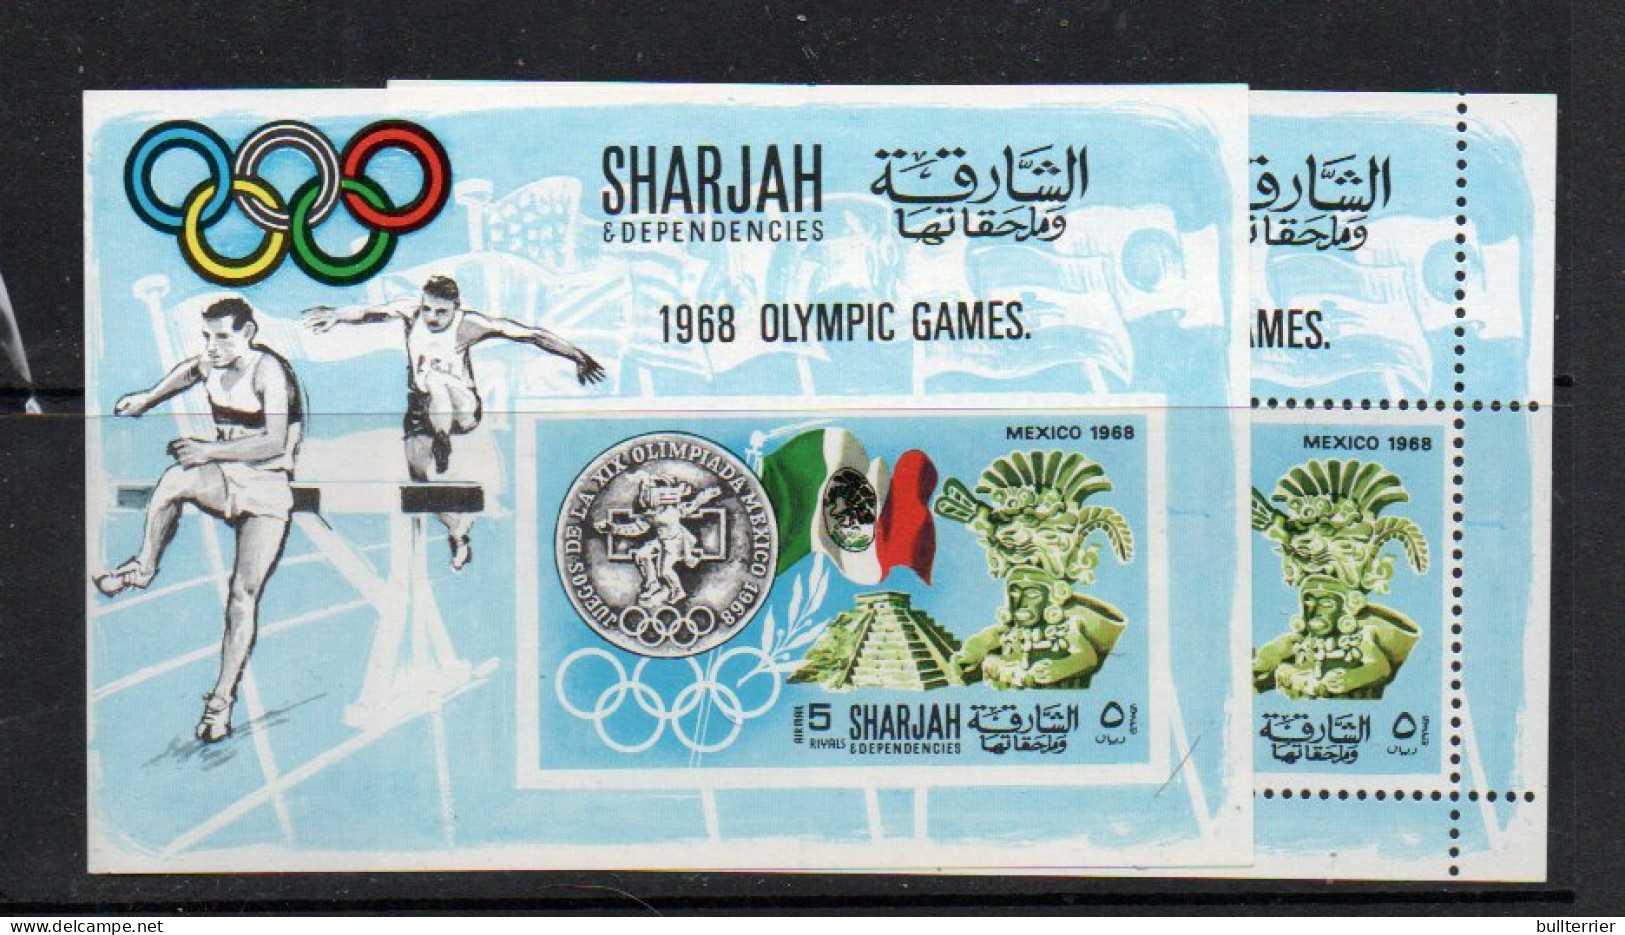 OLYMPICS -SHARJAH - 1968 -MEXICO  OLYMPICS HISTORY  PERF & IMPERF (micB41A&B) MINT NEVRE HINGED,  - Ete 1968: Mexico